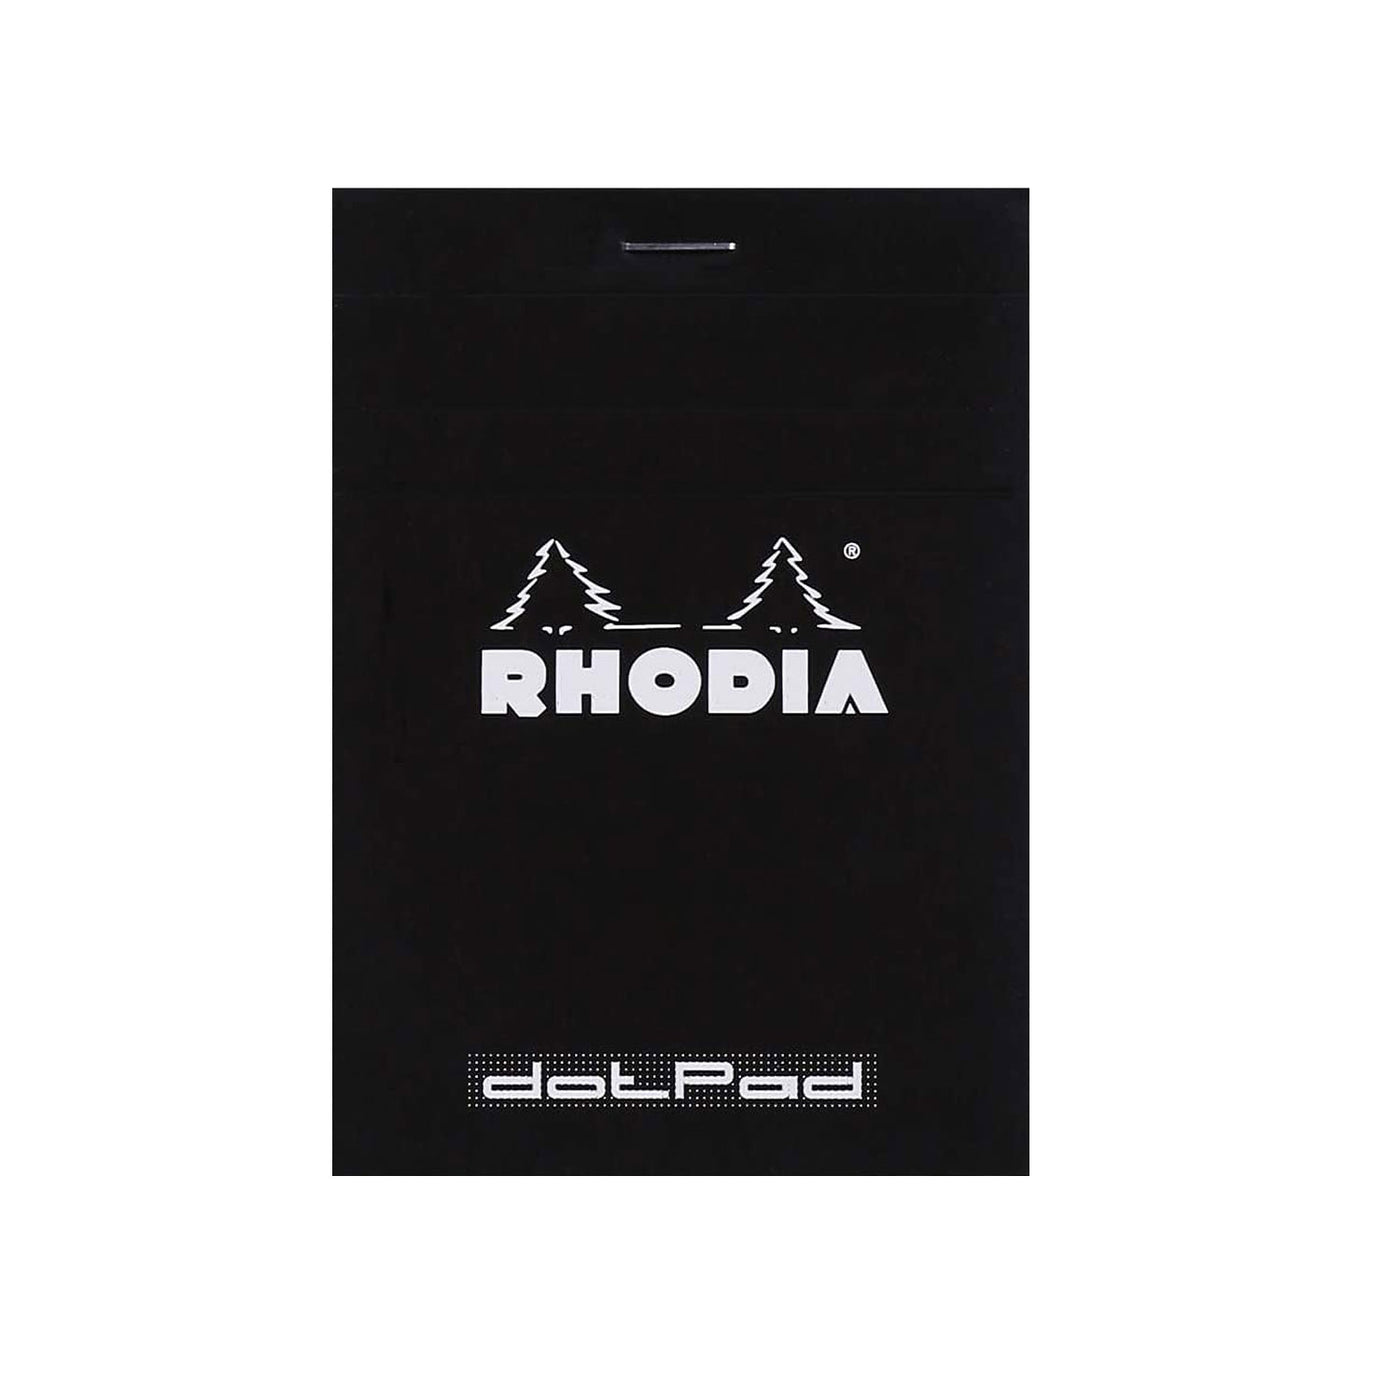 Rhodia No. 12 Black Notepad - Small, Dotted 1